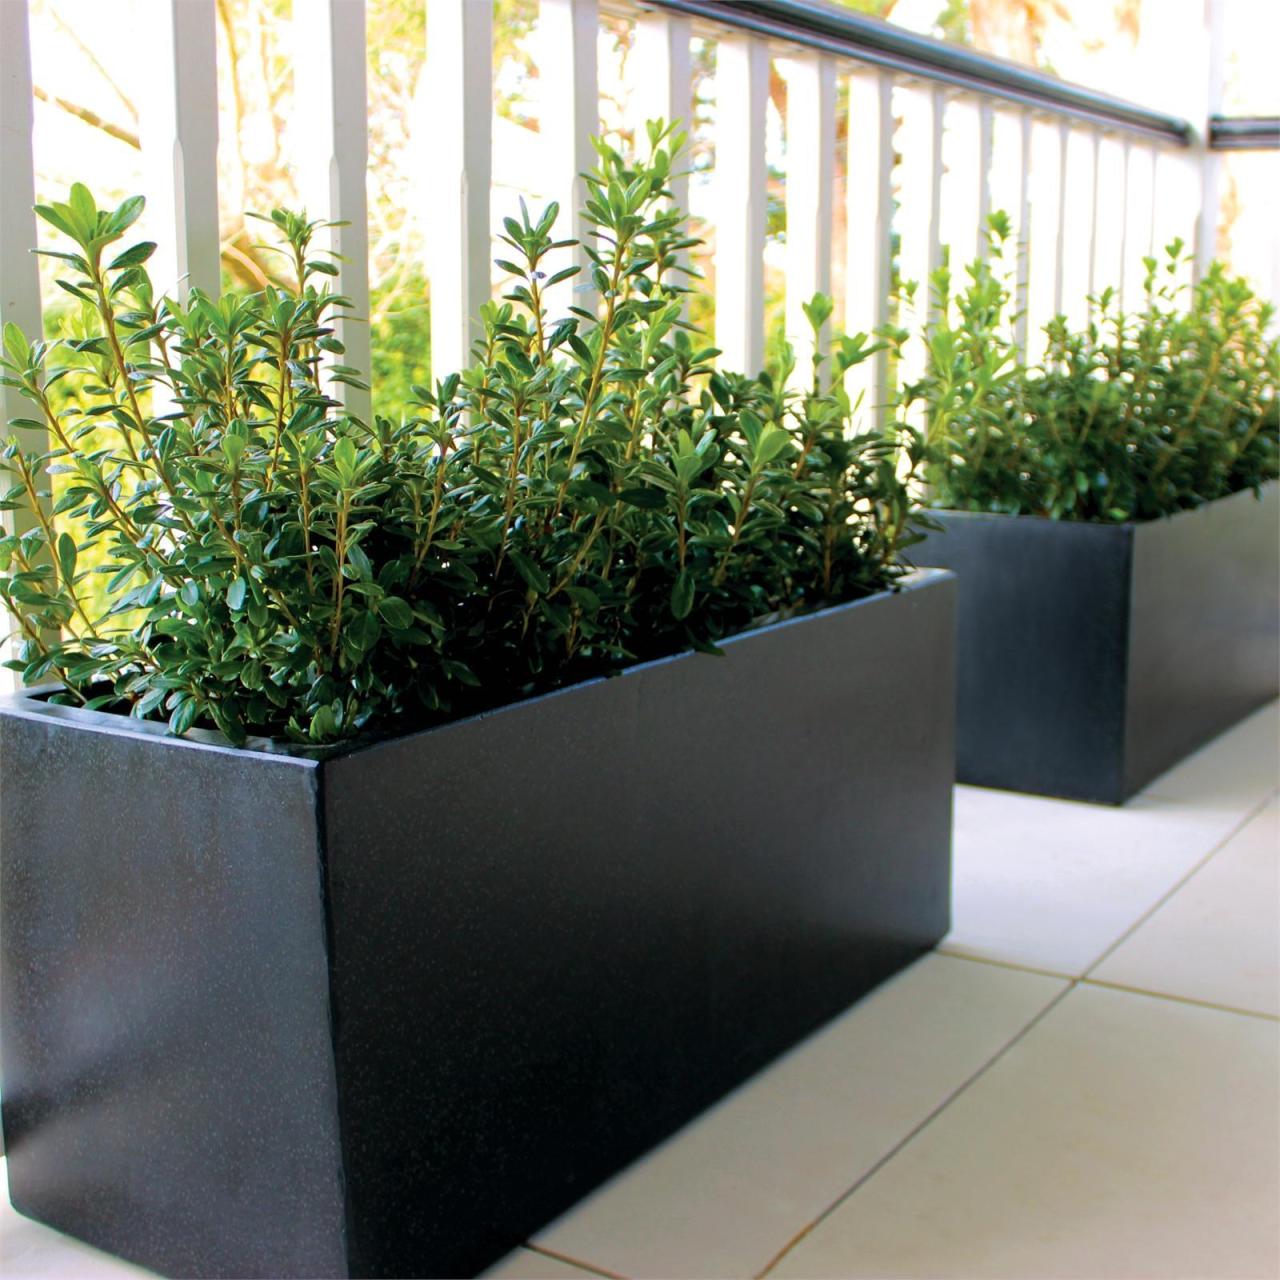 Hanging Plants Indoor | Bunnings Large Ceramic Garden Pots: Enhance Your Outdoor Oasis with Style and Functionality